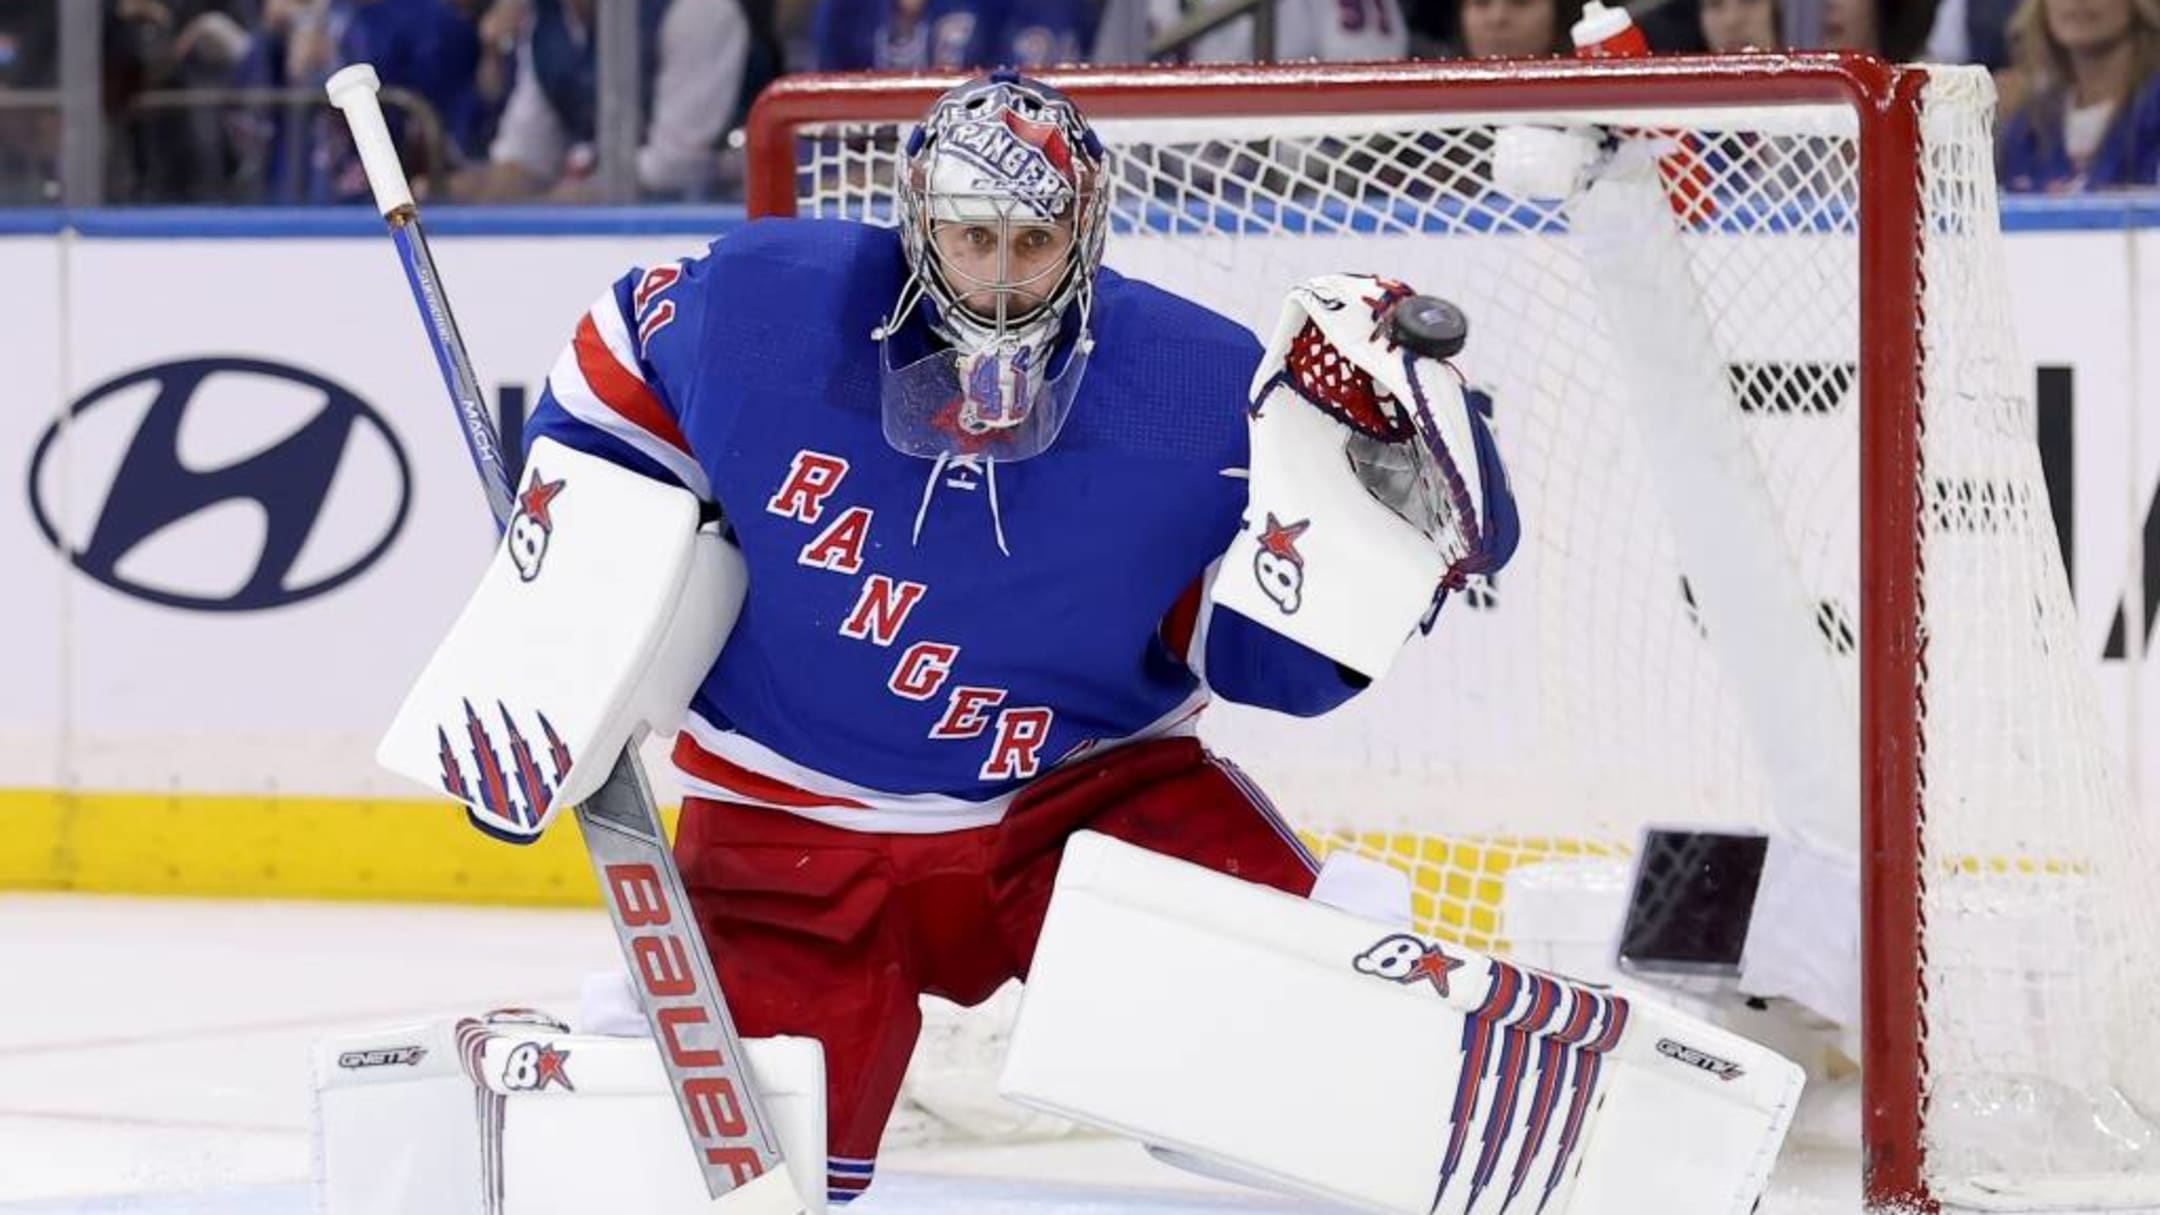 How to Watch the Devils vs. Rangers Game: Streaming & TV Info